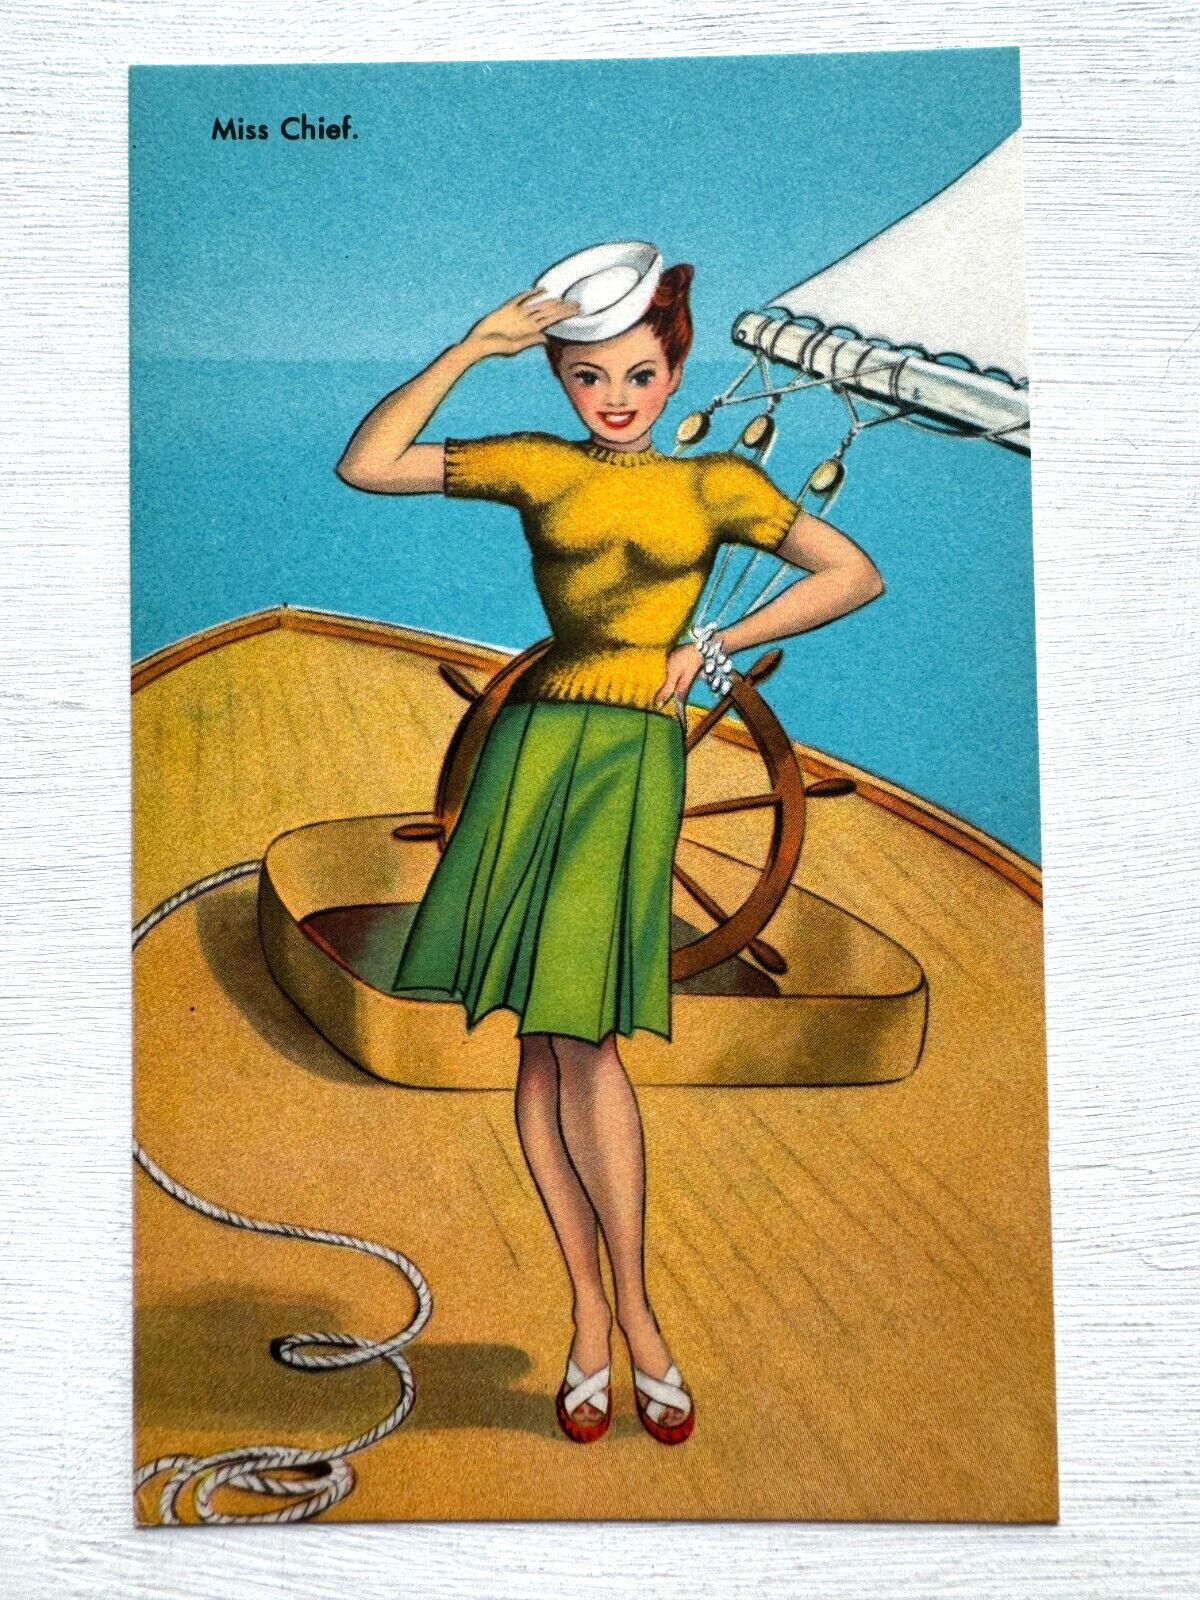 Vintage 1940-50's Pinup Girl Postcard- Miss Chief Navy Woman